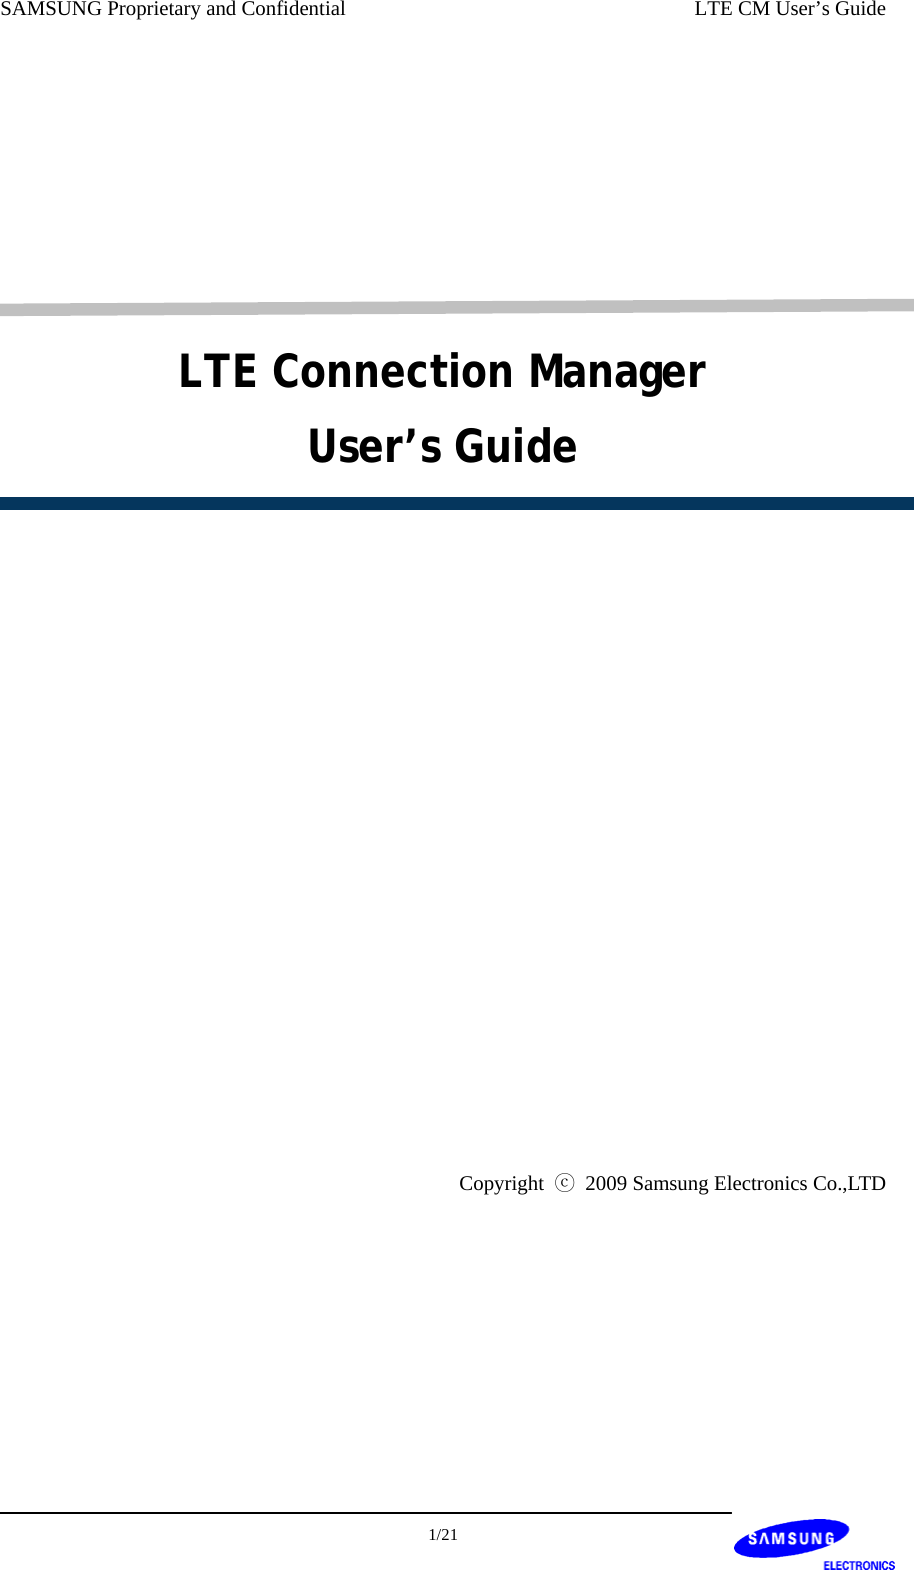 SAMSUNG Proprietary and Confidential    LTE CM User’s Guide       LTE Connection Manager User’s Guide               Copyright  ⓒ  2009 Samsung Electronics Co.,LTD   1/21  